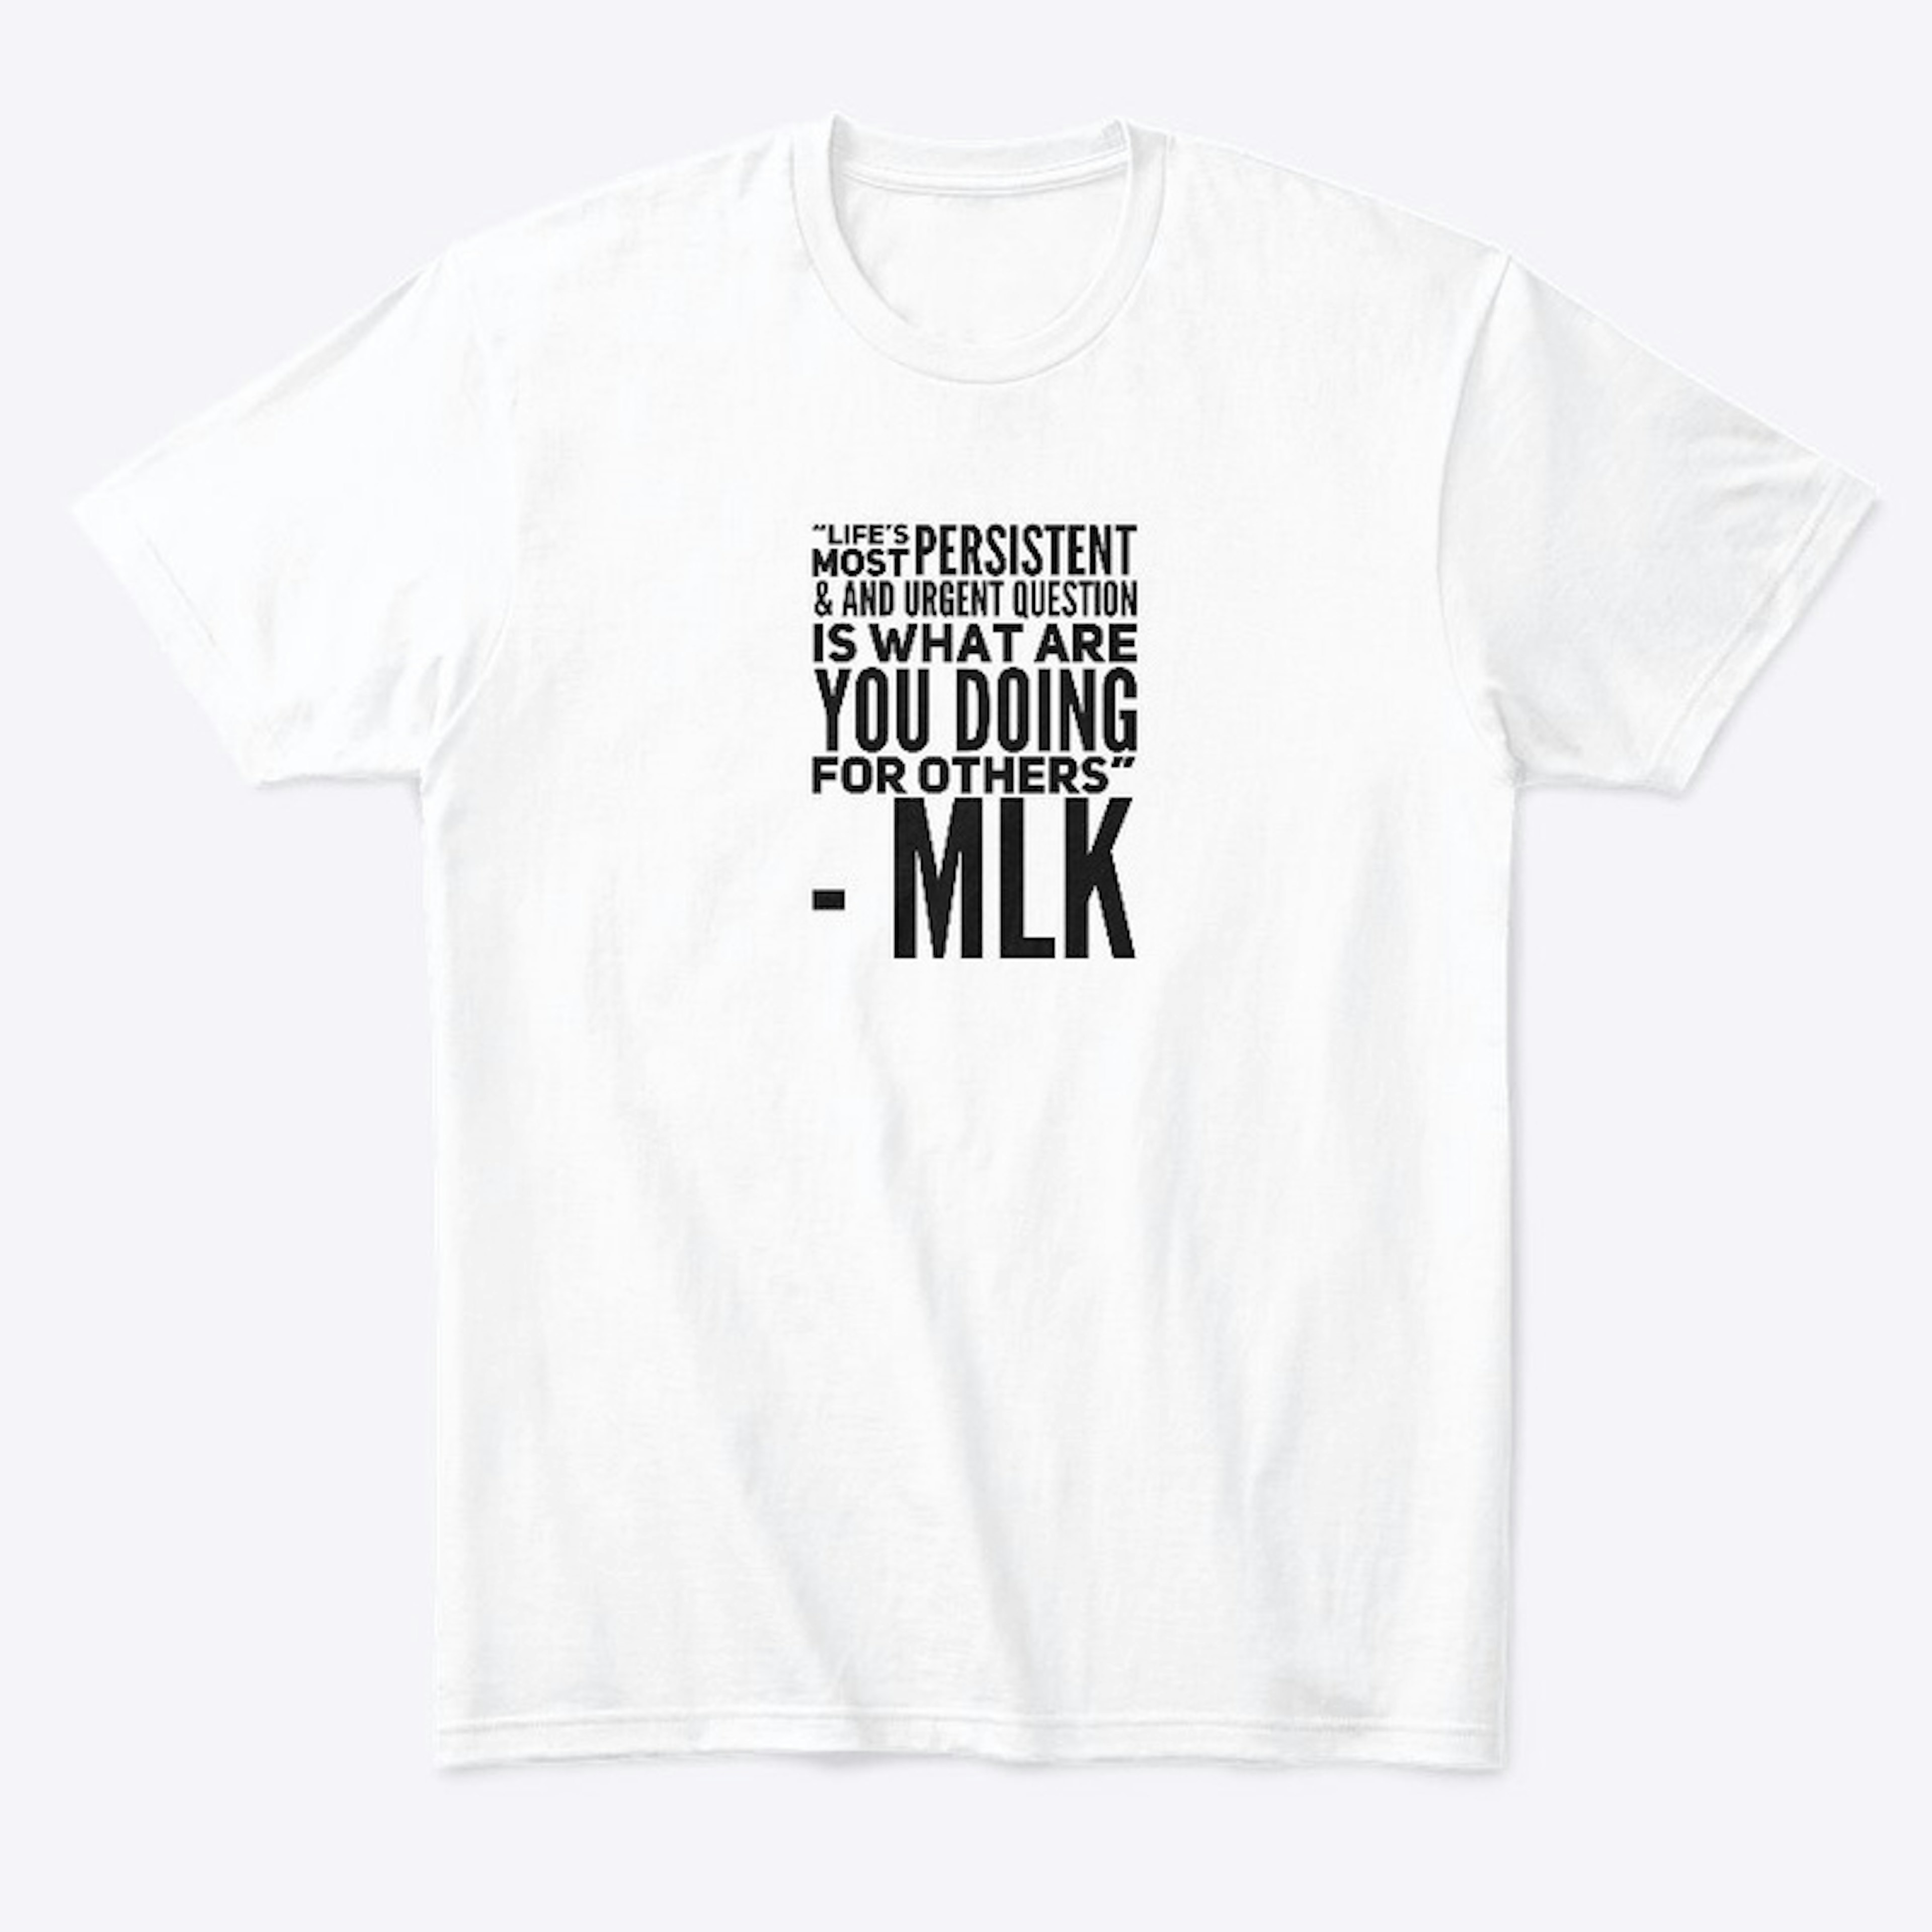 The MLK Collection